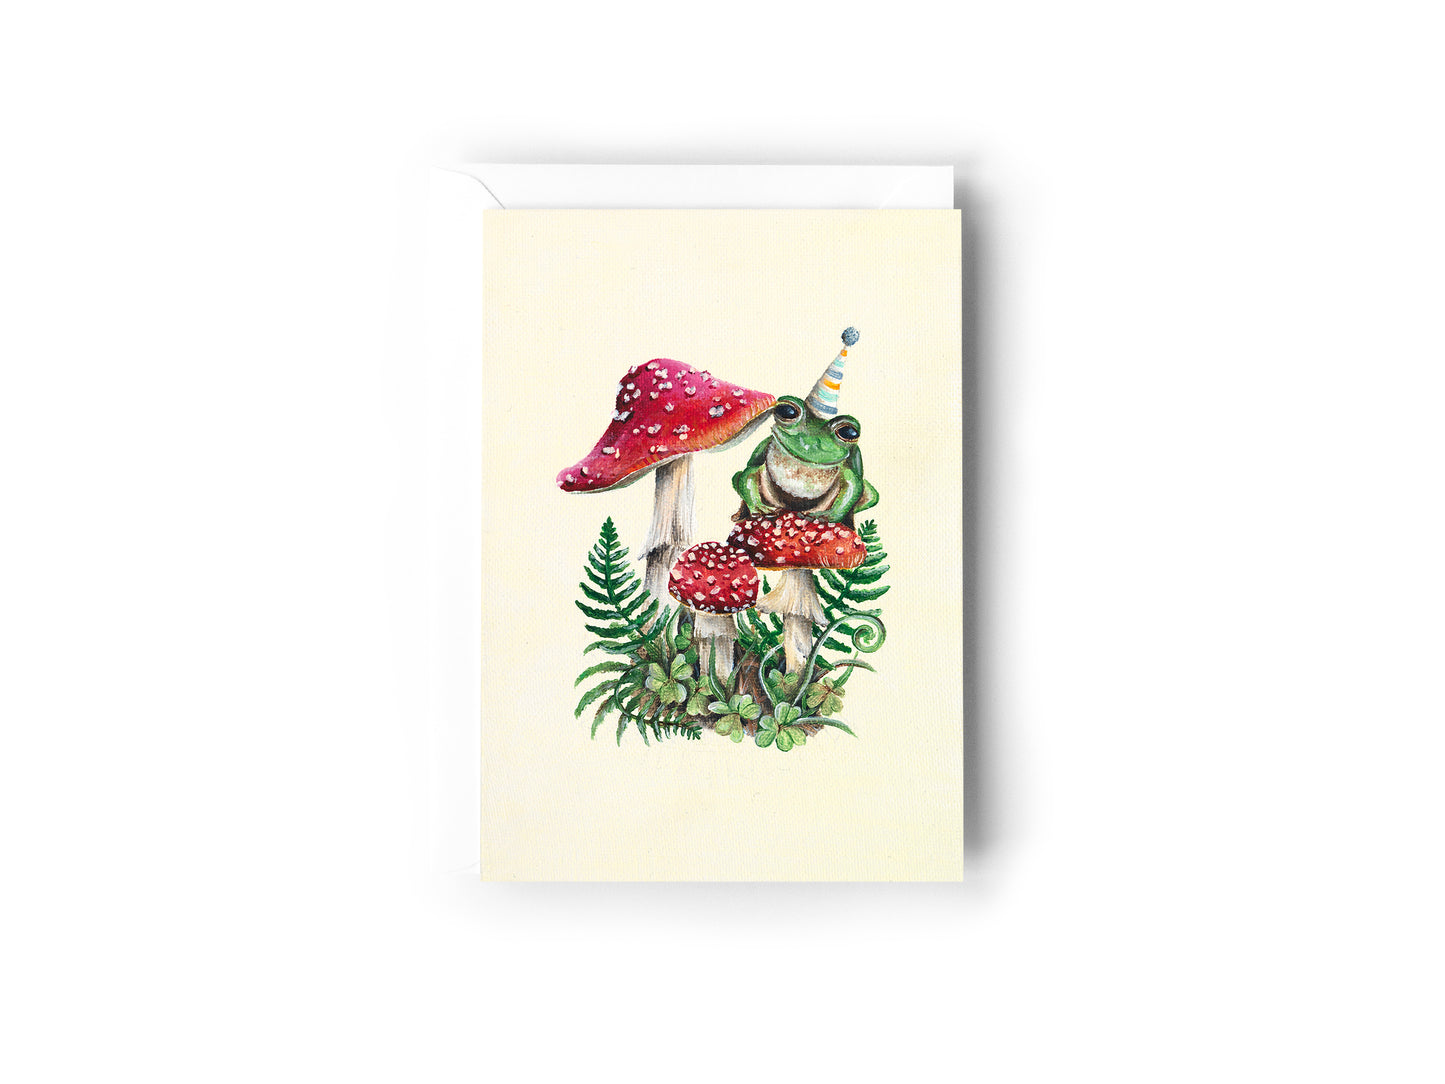 Cream birthday card with frog in a party hat sitting on red toadstools illustration.